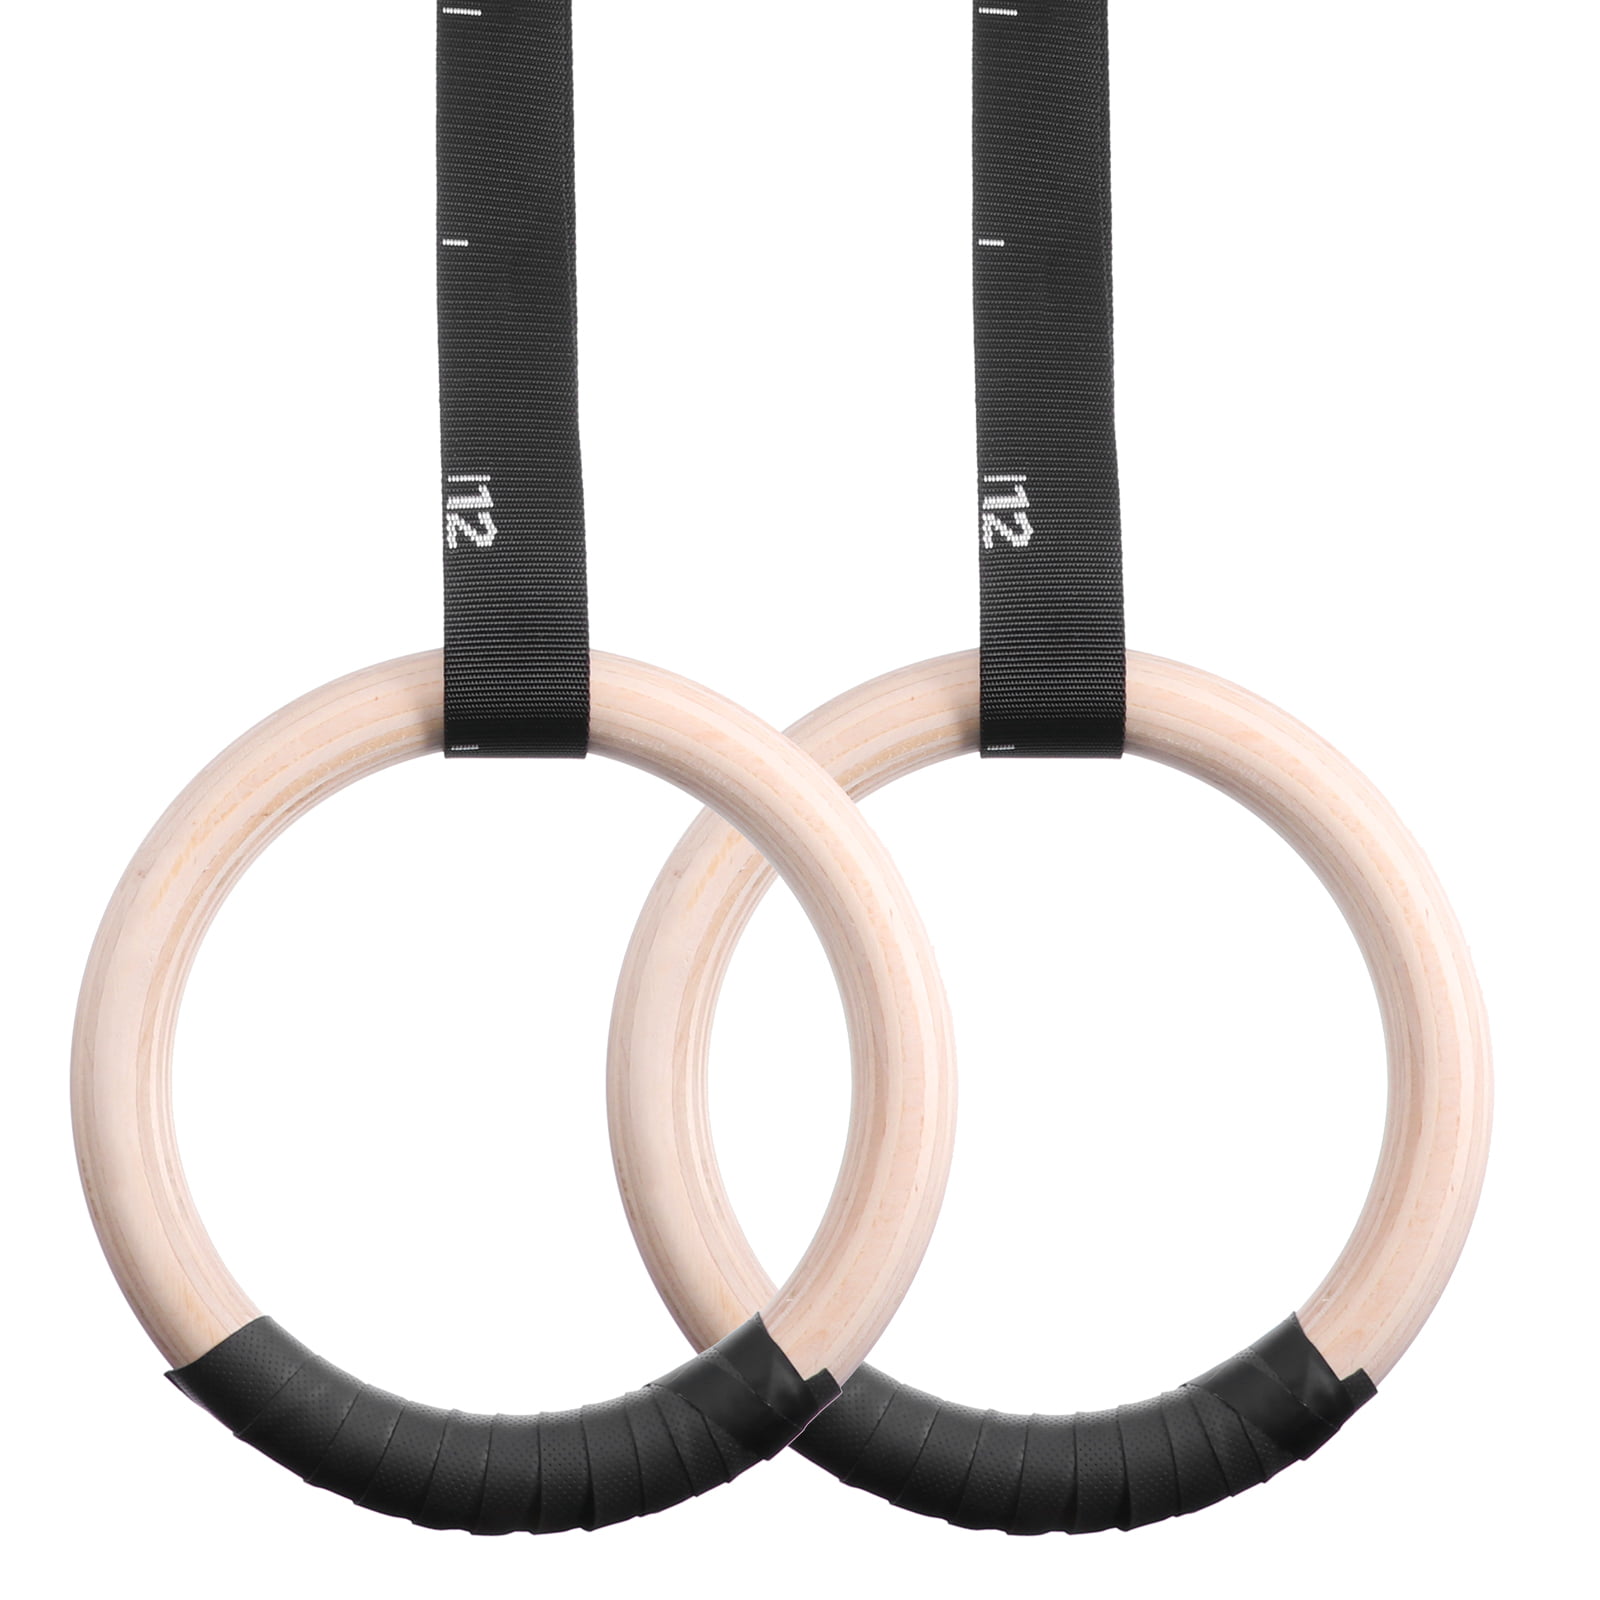 Details about   28mm Wood Gymnastic Rings Gym Rings+Adjustable Straps Workout Home & Gym Fitness 